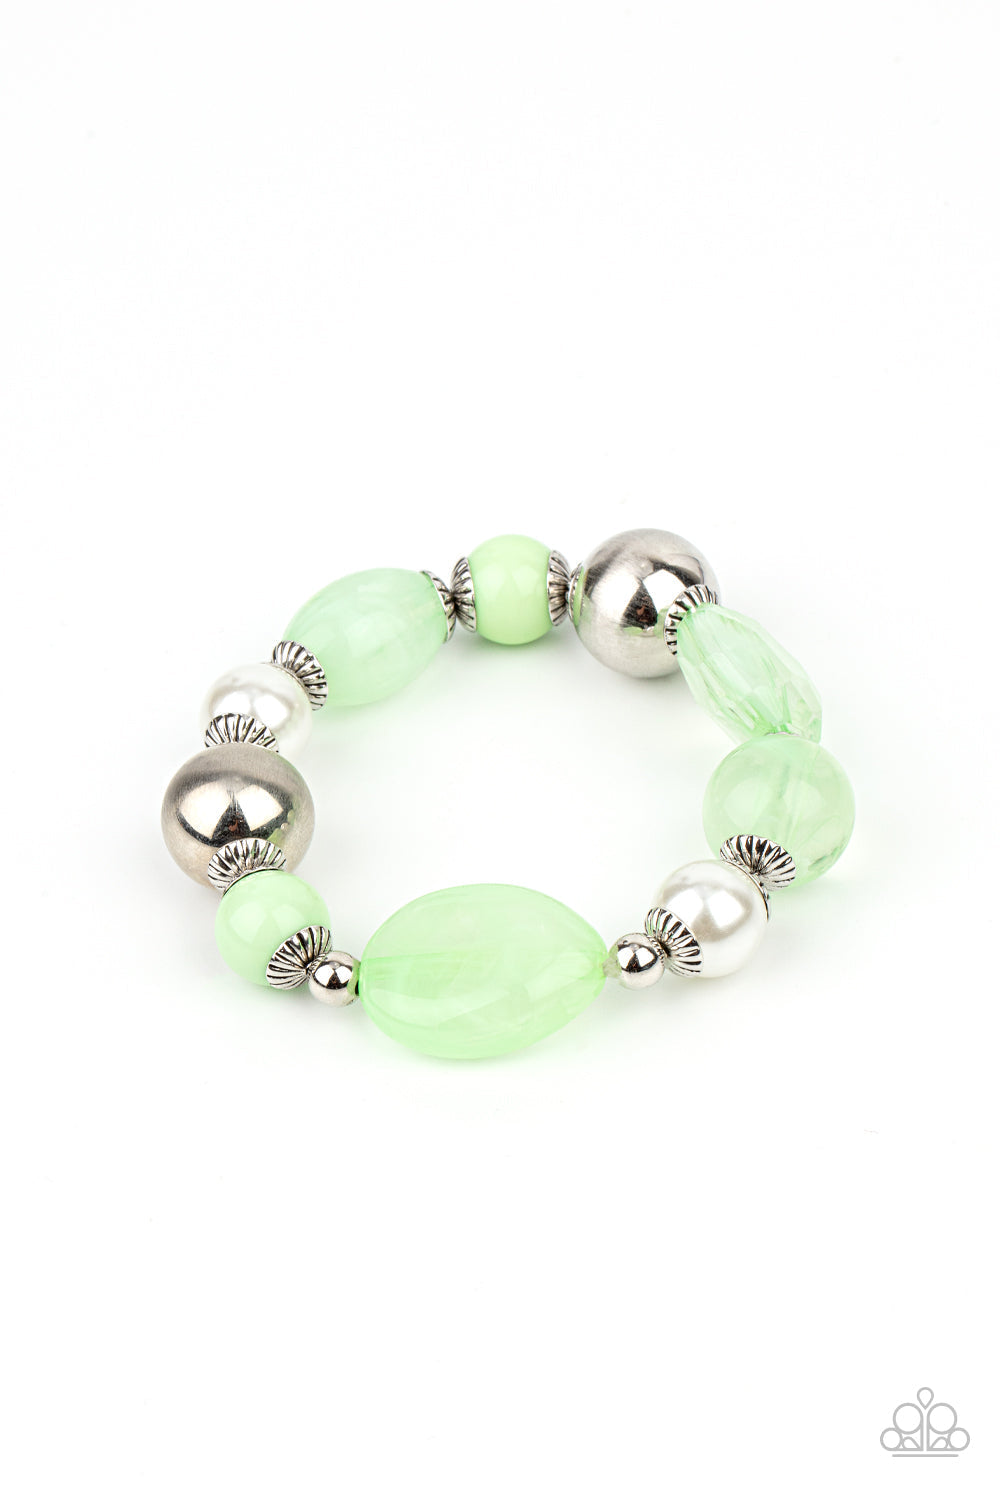 Resort Ritz - Green Bead - White Pearl Stretchy Bracelet - Paparazzi Accessories - Bejeweled Accessories By Kristie - A lavish assortment of white pearls, silver accents, and glassy and acrylic Green Ash beads are threaded along a stretchy band around the wrist for a refreshing pop of color fashion bracelet.